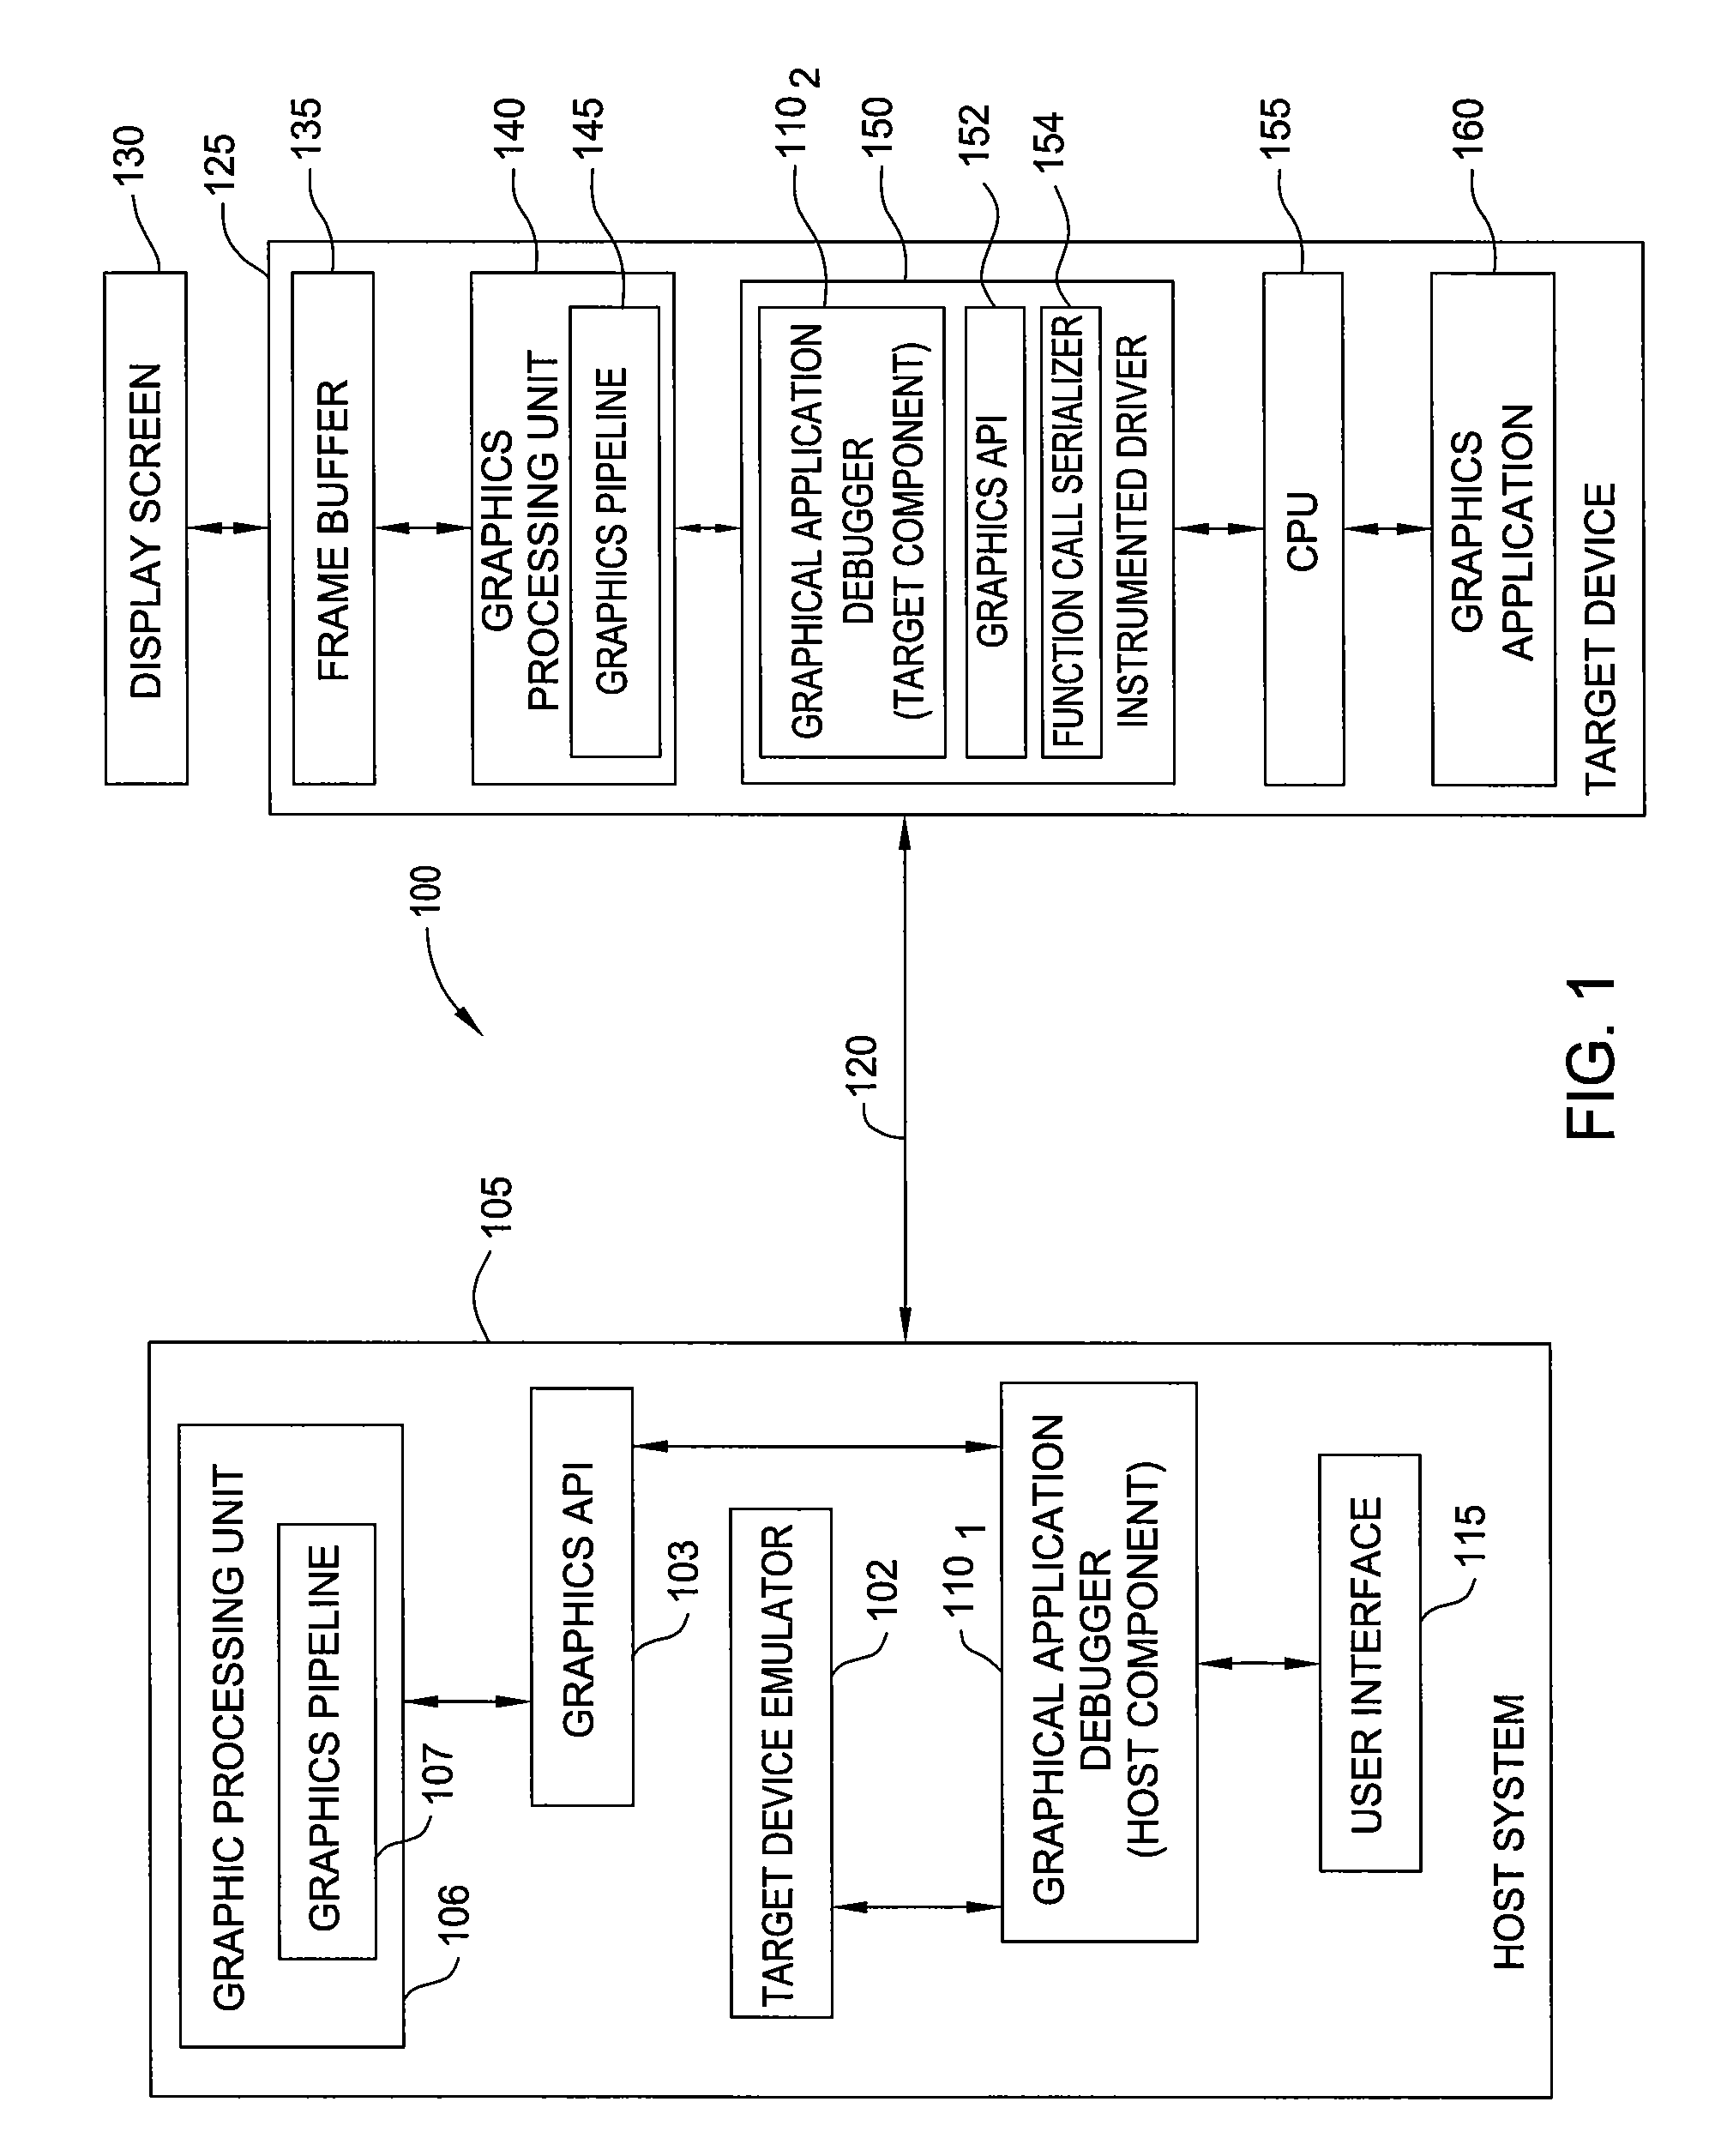 Serialization of function calls to a graphics API for debugging a remote device